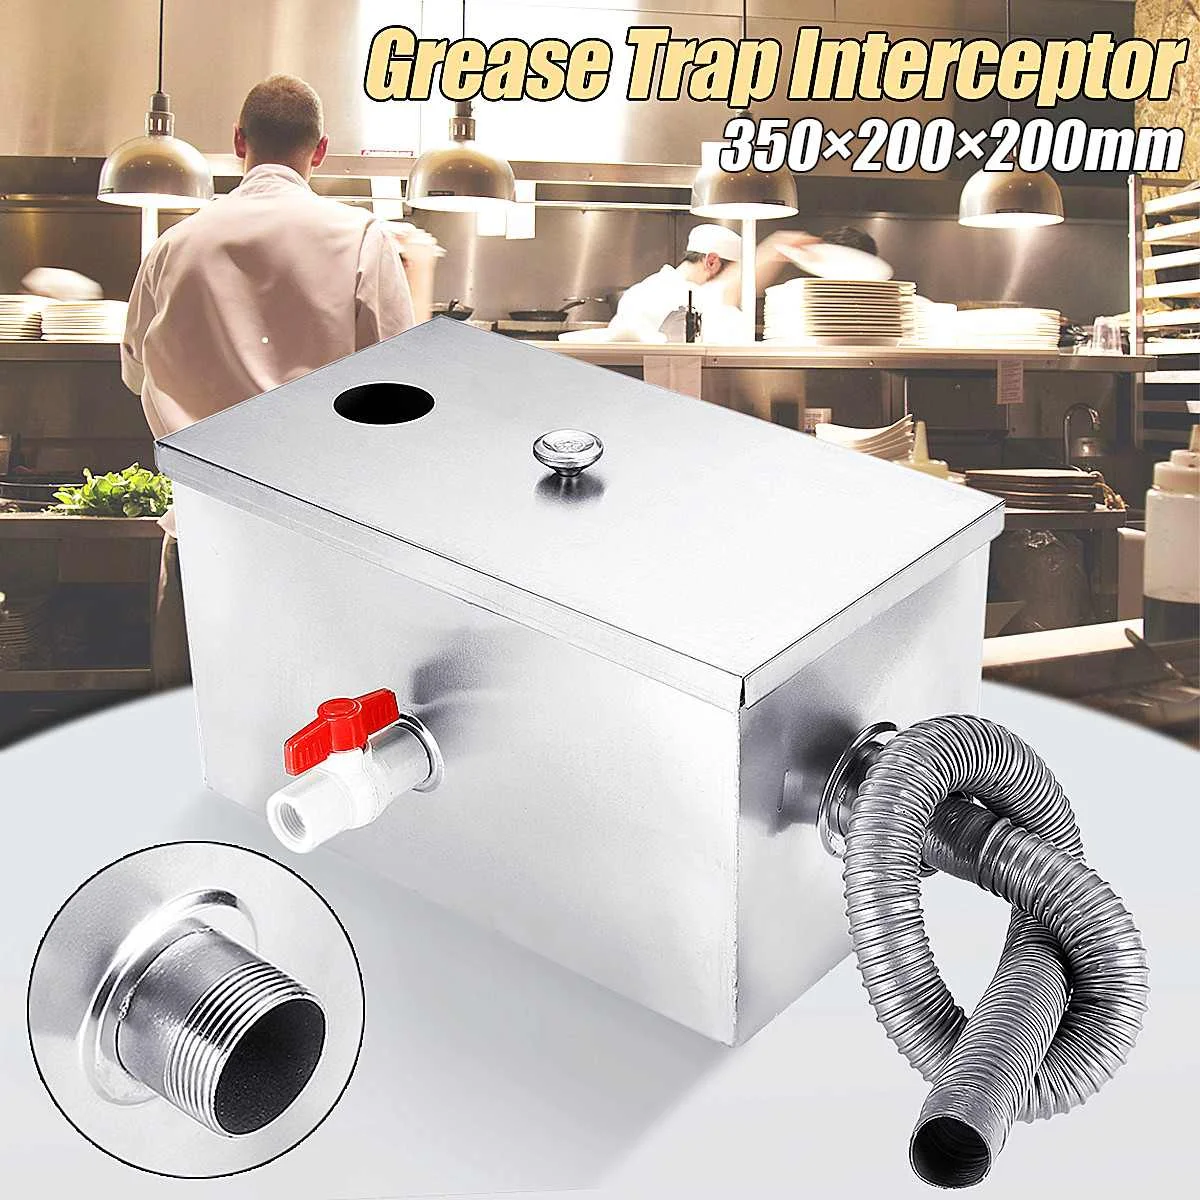 Large Stainless Steel Grease Trap Interceptor Oil Water Separator Commercial UK 